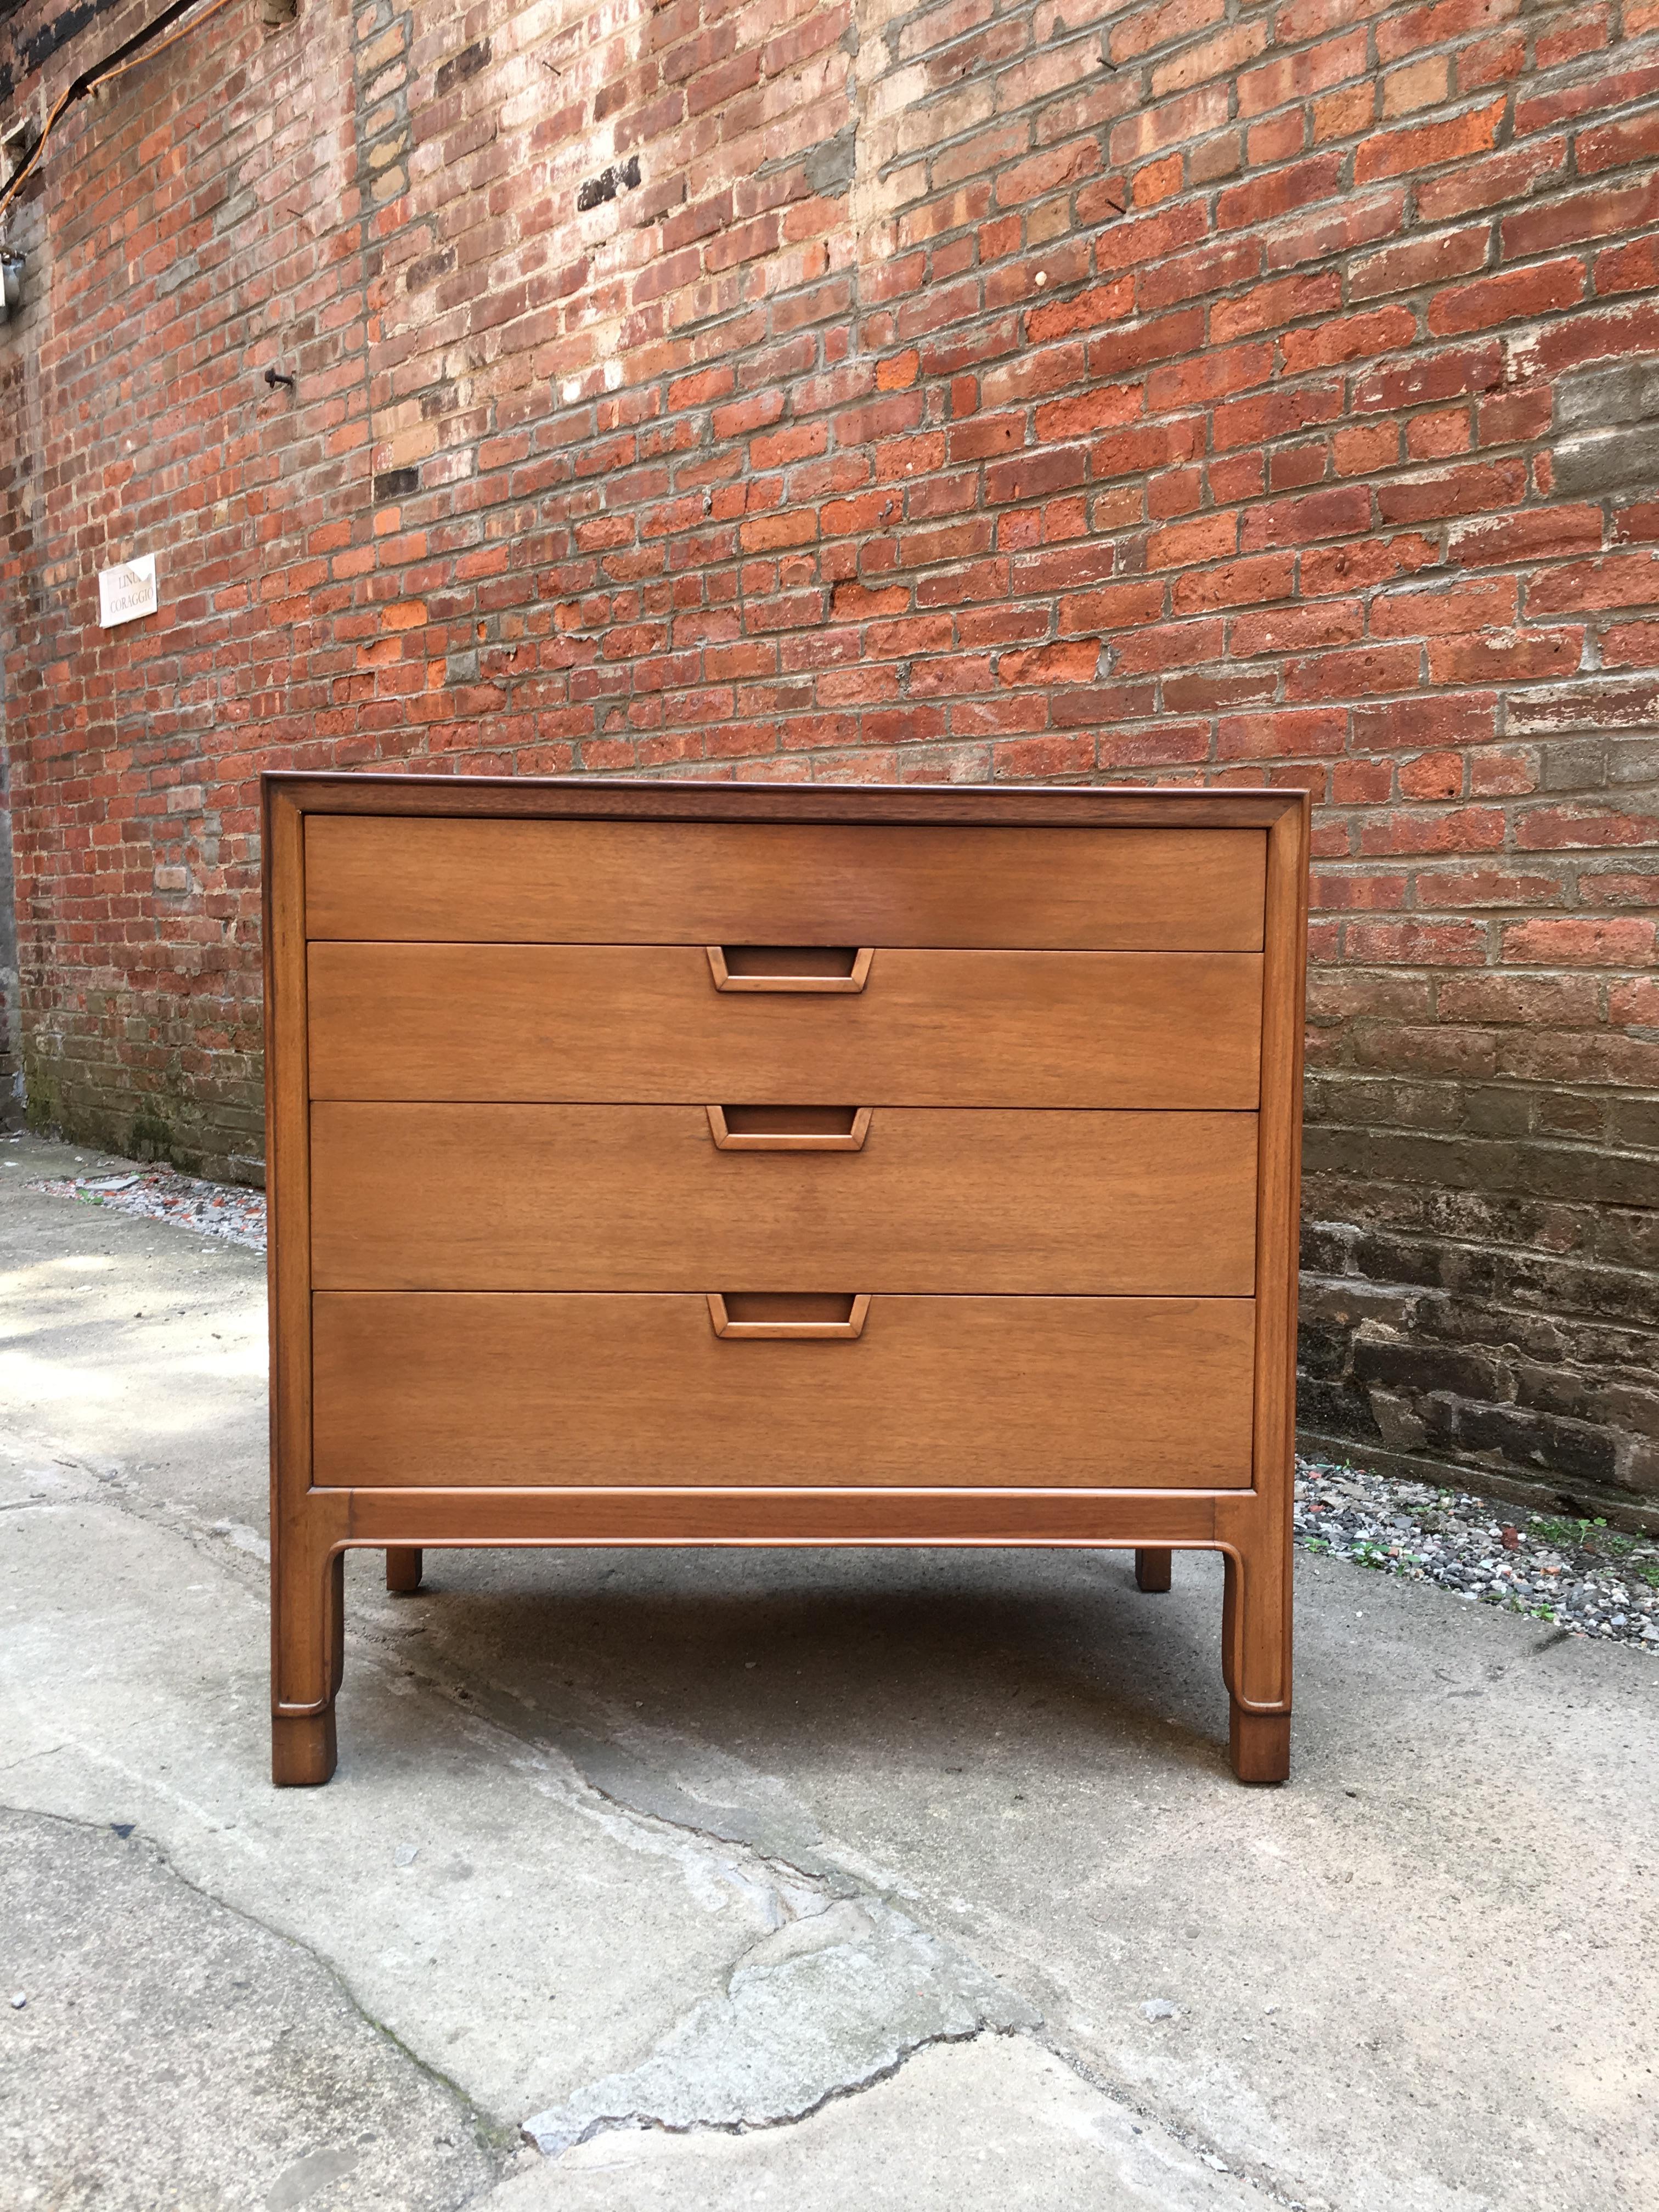 Beautiful solid and veneer walnut construction, circa 1955-1960. Four drawers on nicely carved legs. Banded veneer edge on top. Recessed handles. Oak secondary wood. Signed with burn in Janus stamp. Nice original condition. Missing the enamel John